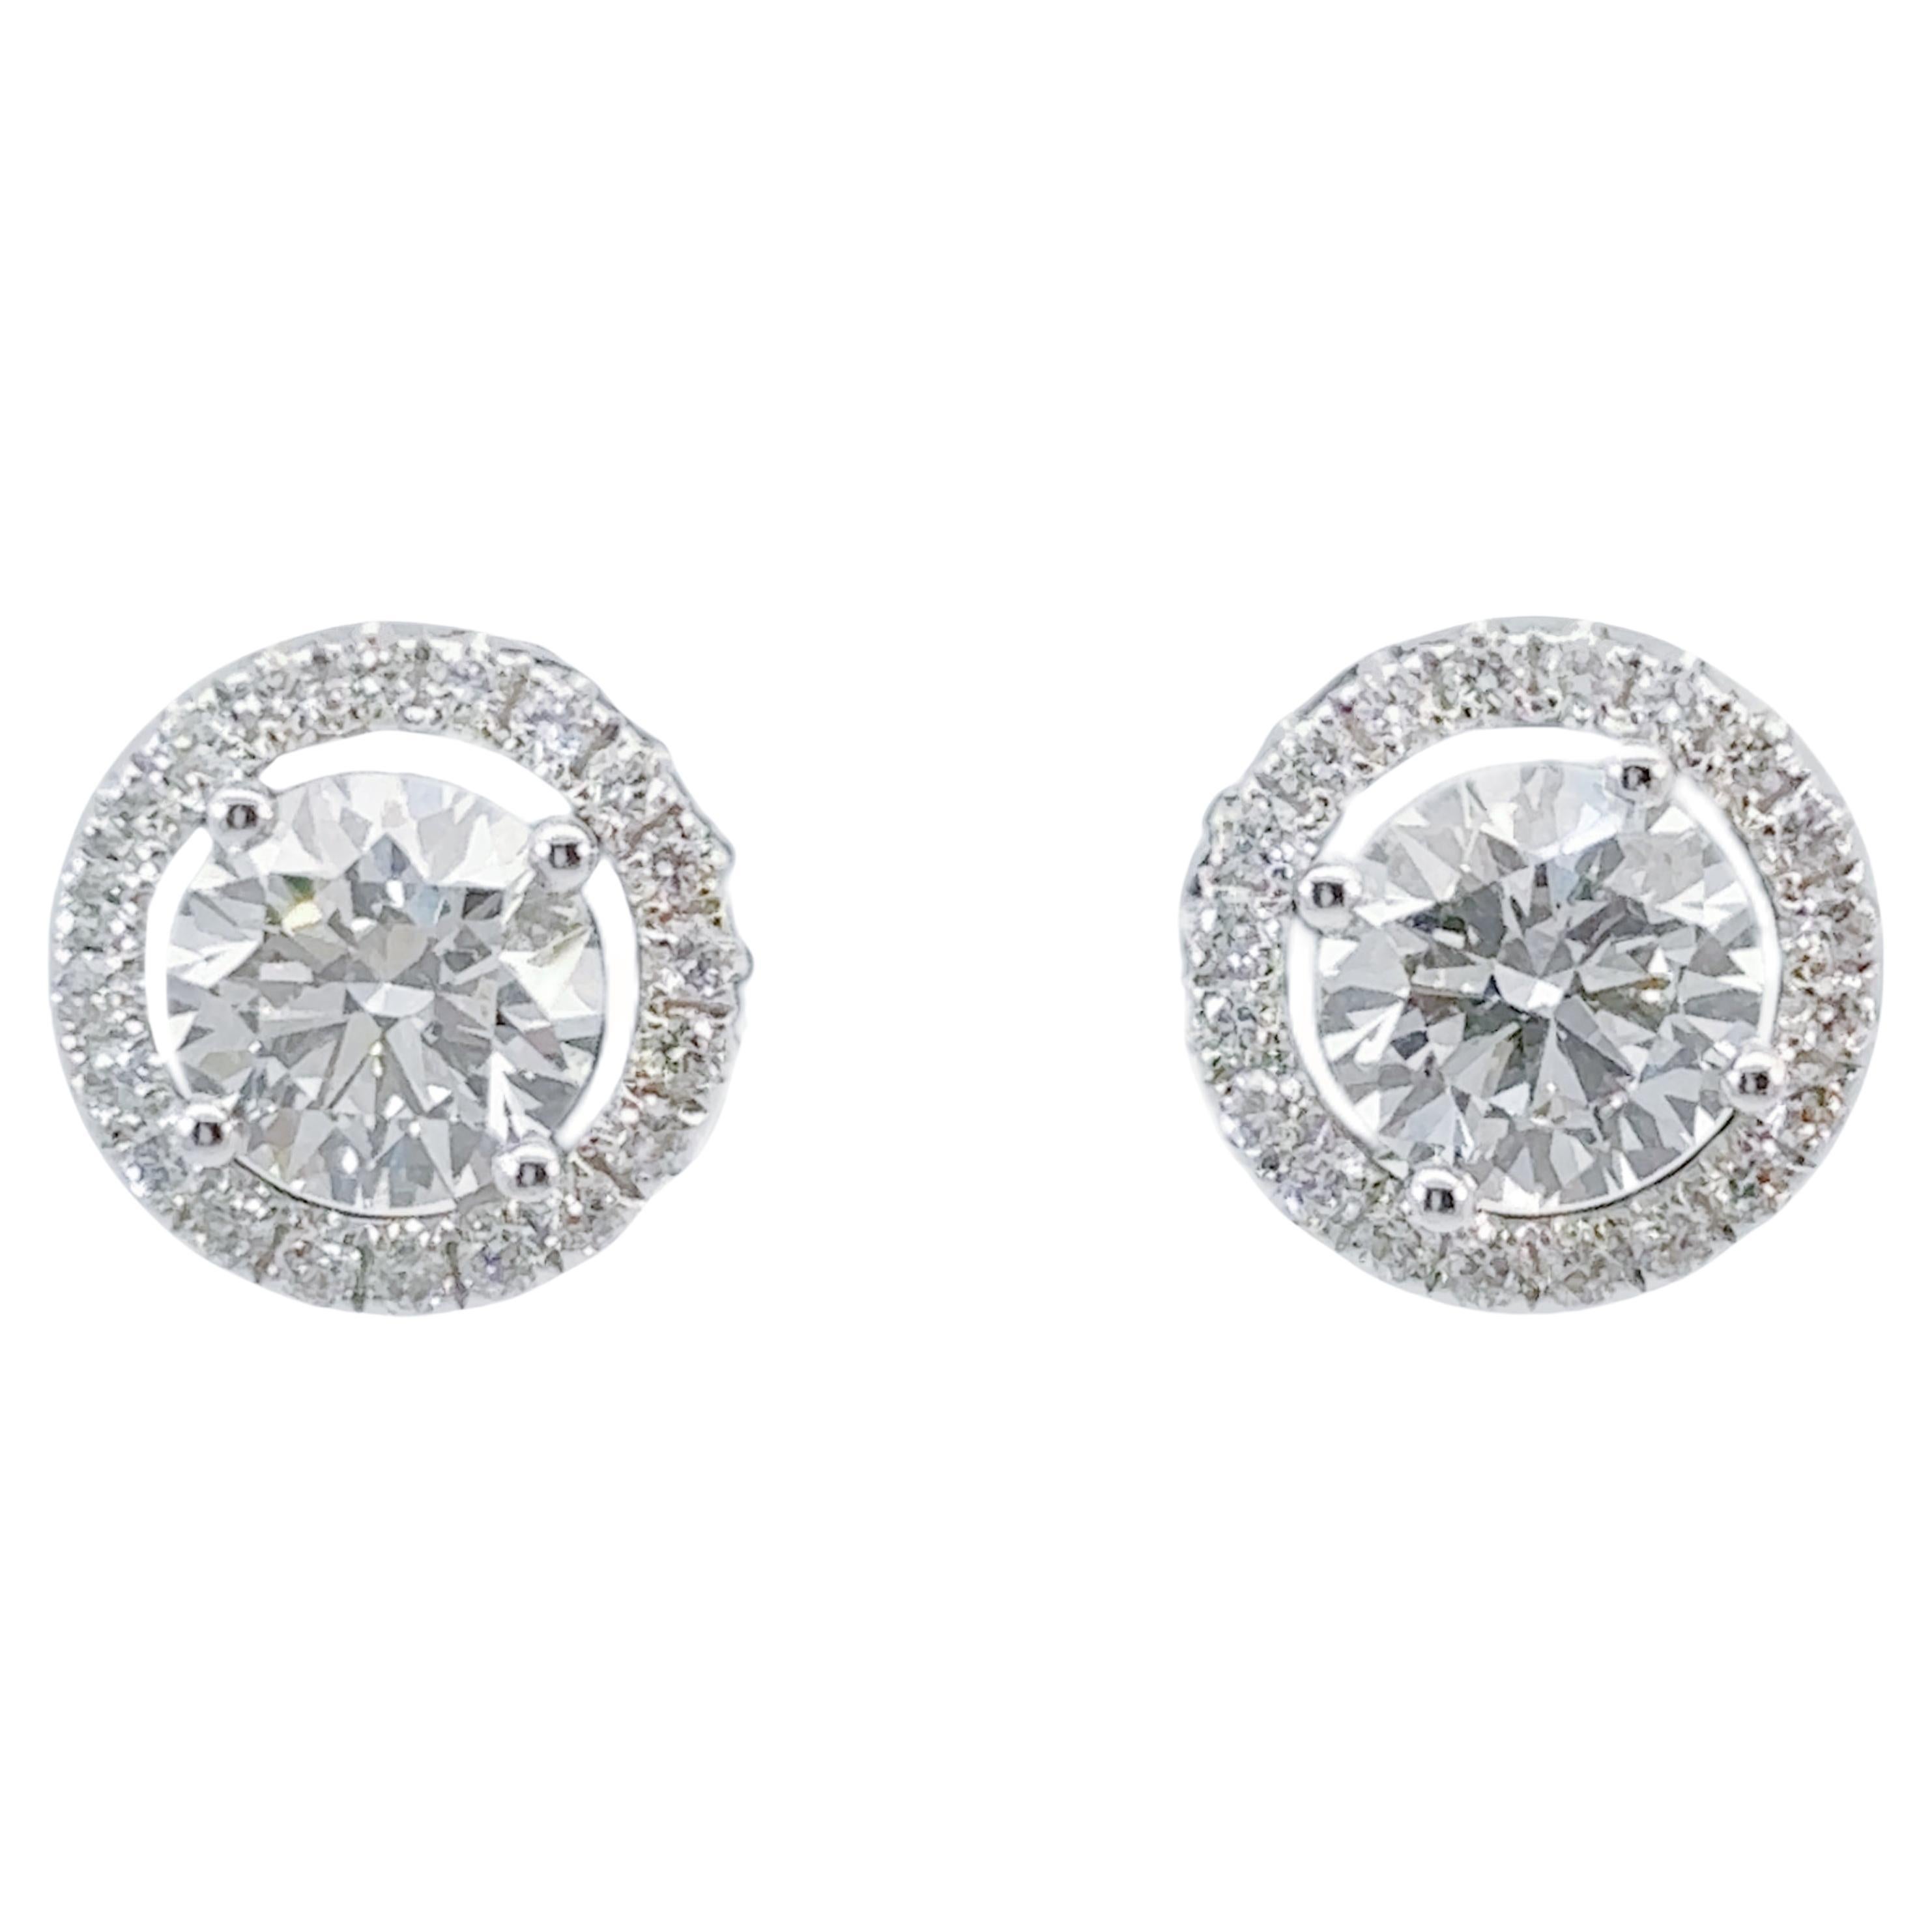 GIA-certified 2 Carat Diamond Halo 18k White Gold Stud Earrings Made to Order